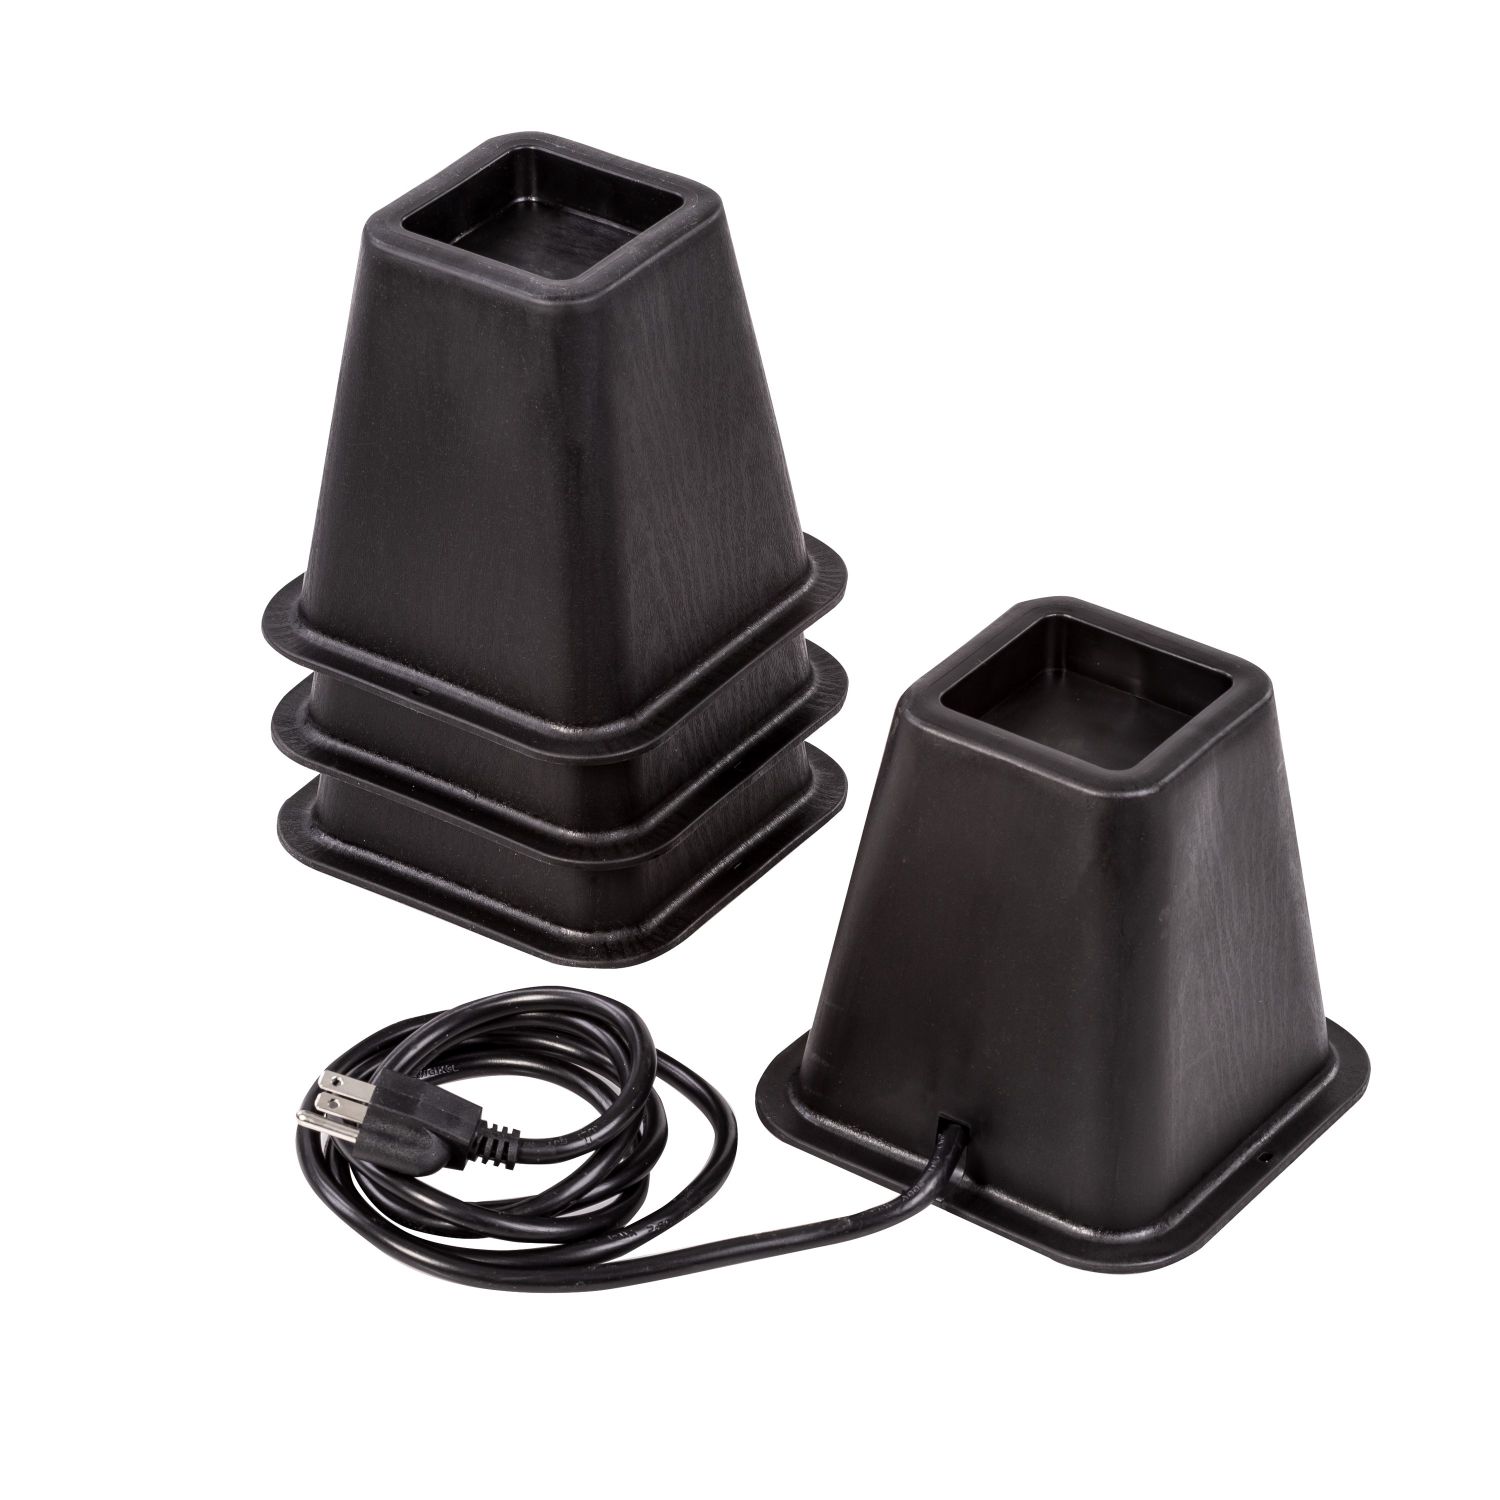 Honey Can Do Set of 4 Black Bed Risers with Outlets and USB Ports